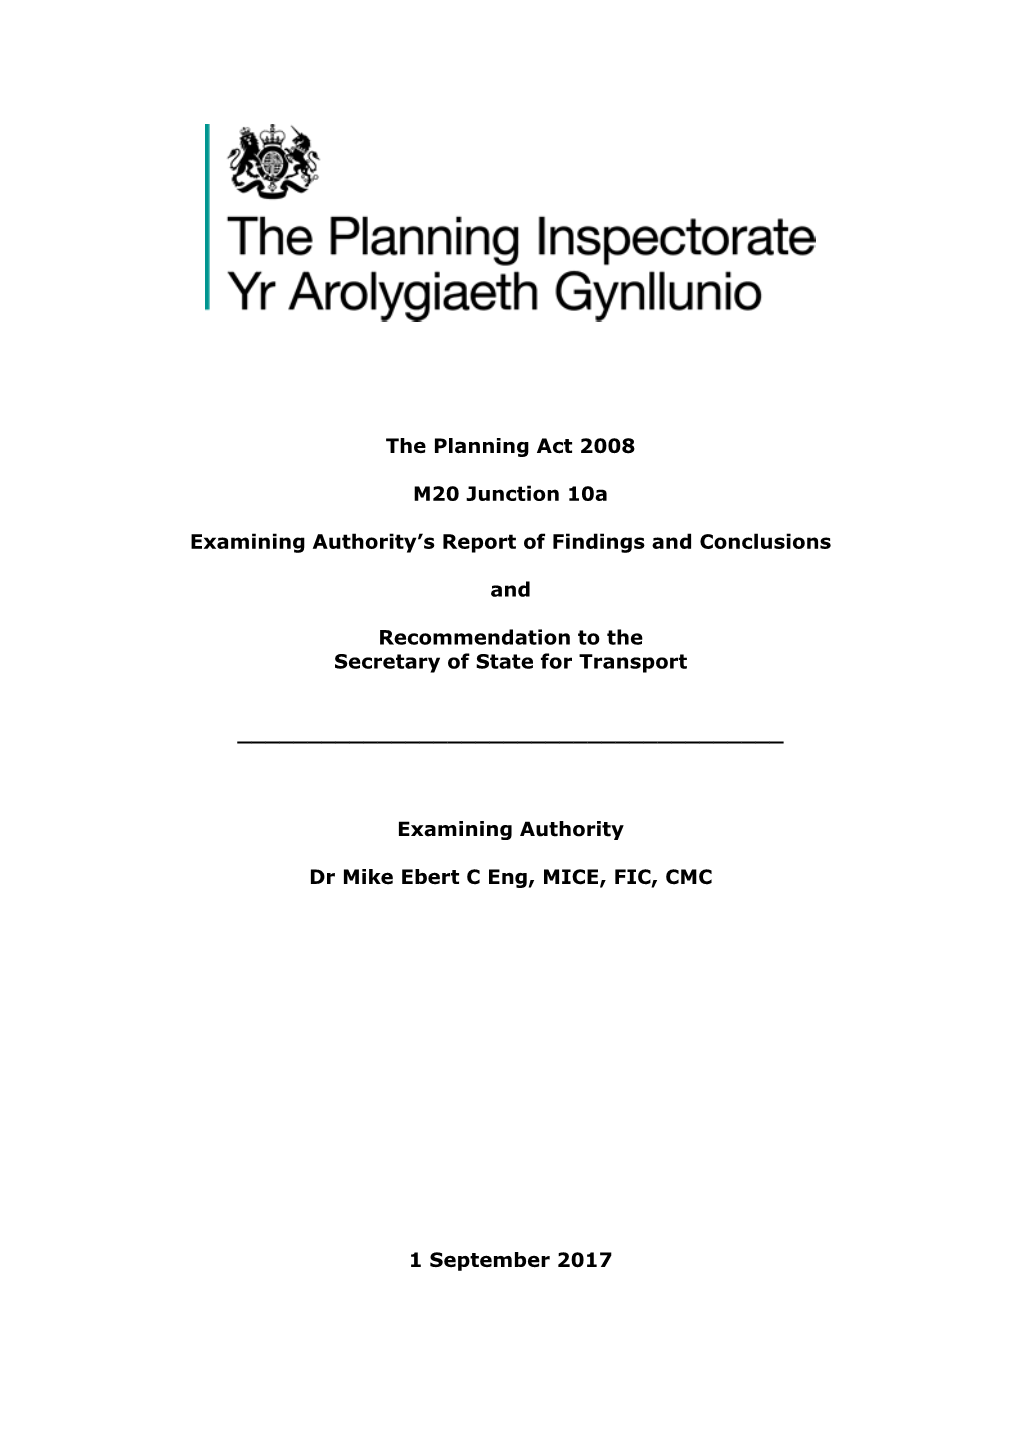 The Planning Act 2008 M20 Junction 10A Examining Authority's Report Of